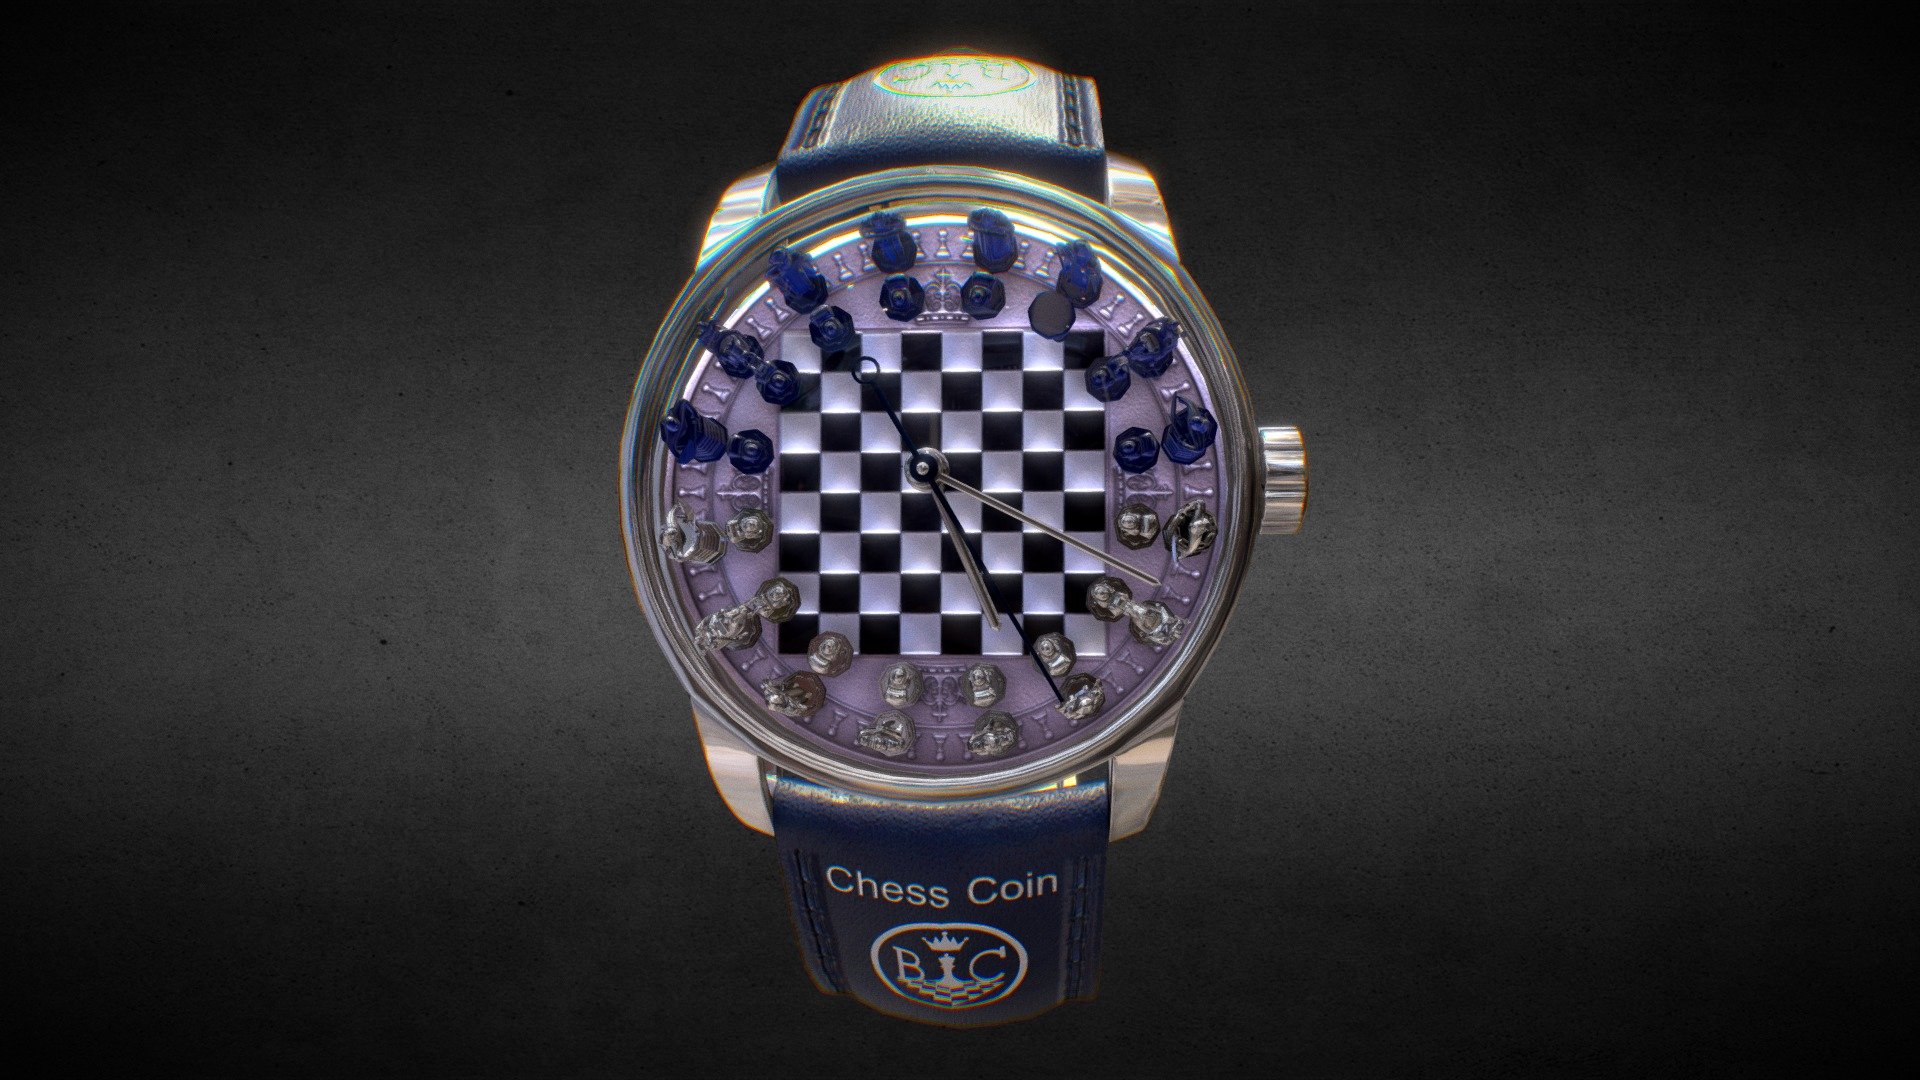 Awesome stainless steel Chess crypto coin Watch.

Currently available for download in FBX format.

3D model developed by AR-Watches 3d model